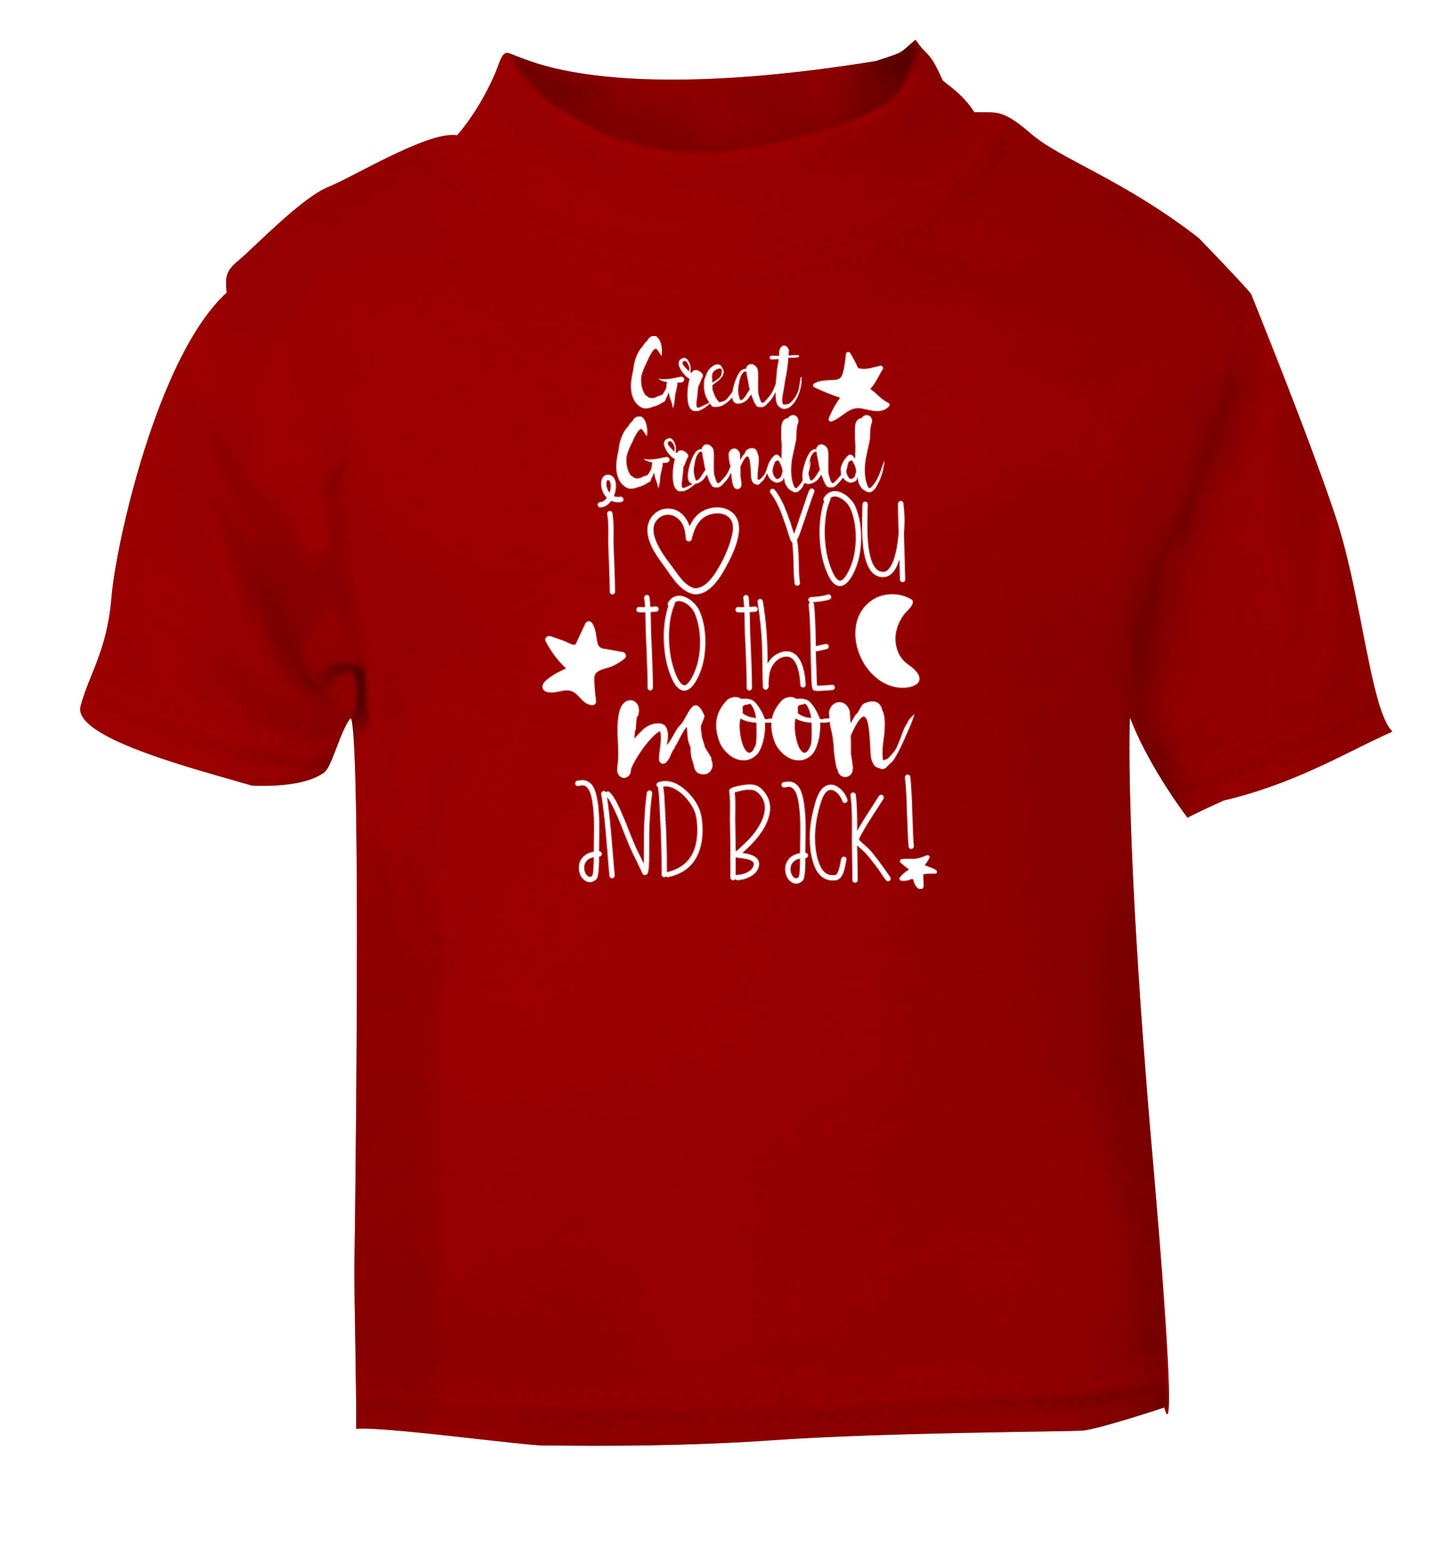 Great Grandad I love you to the moon and back red Baby Toddler Tshirt 2 Years